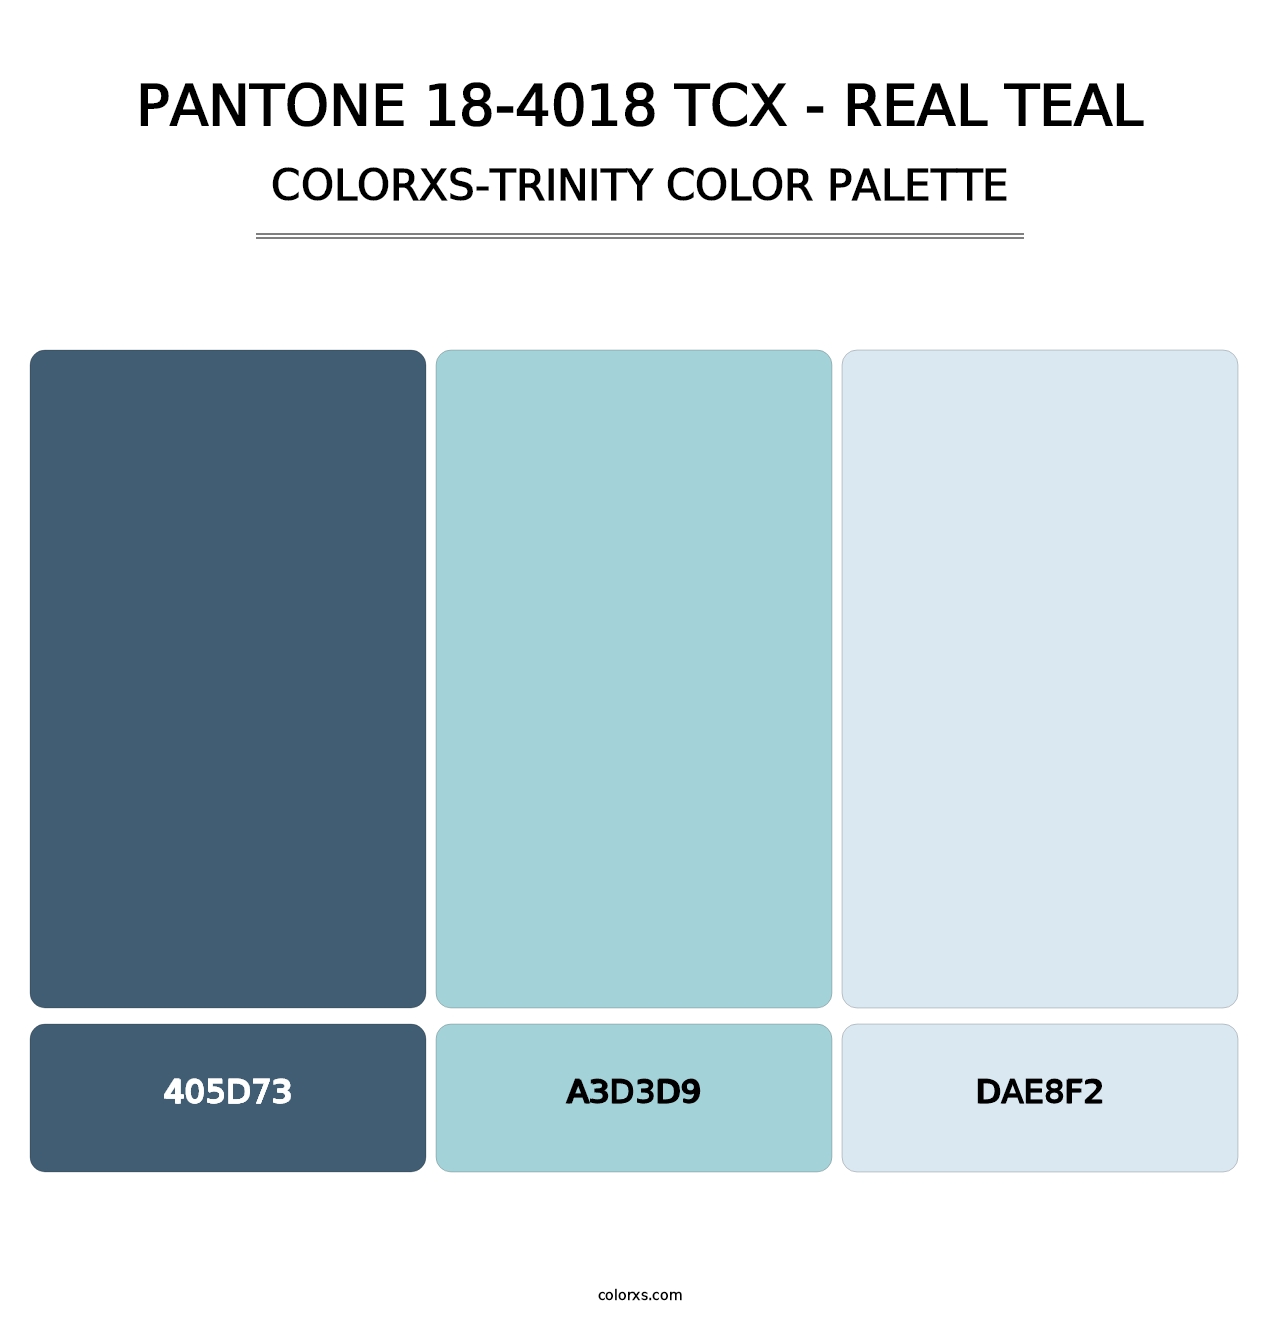 PANTONE 18-4018 TCX - Real Teal - Colorxs Trinity Palette